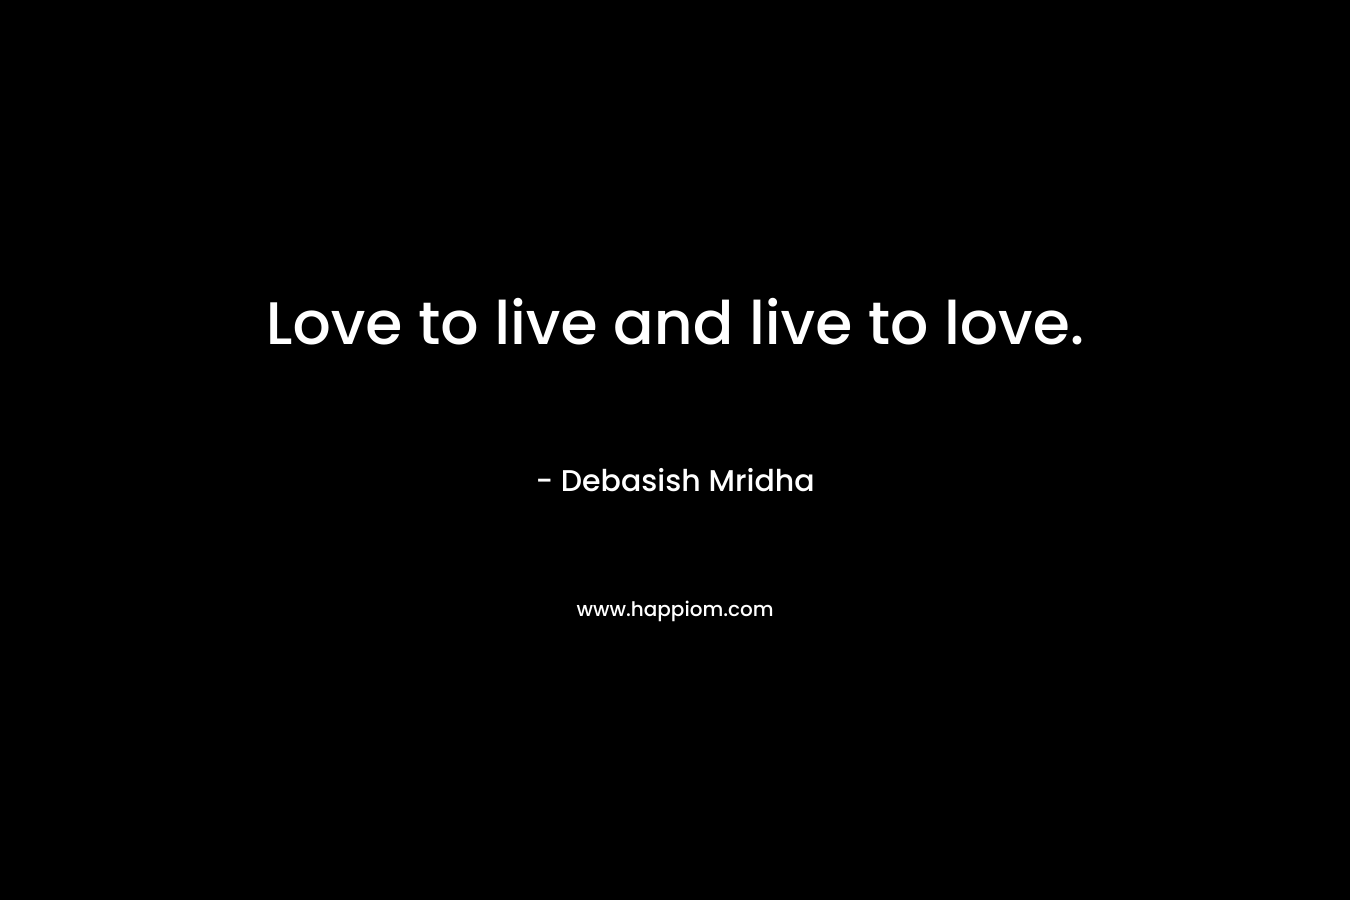 Love to live and live to love.